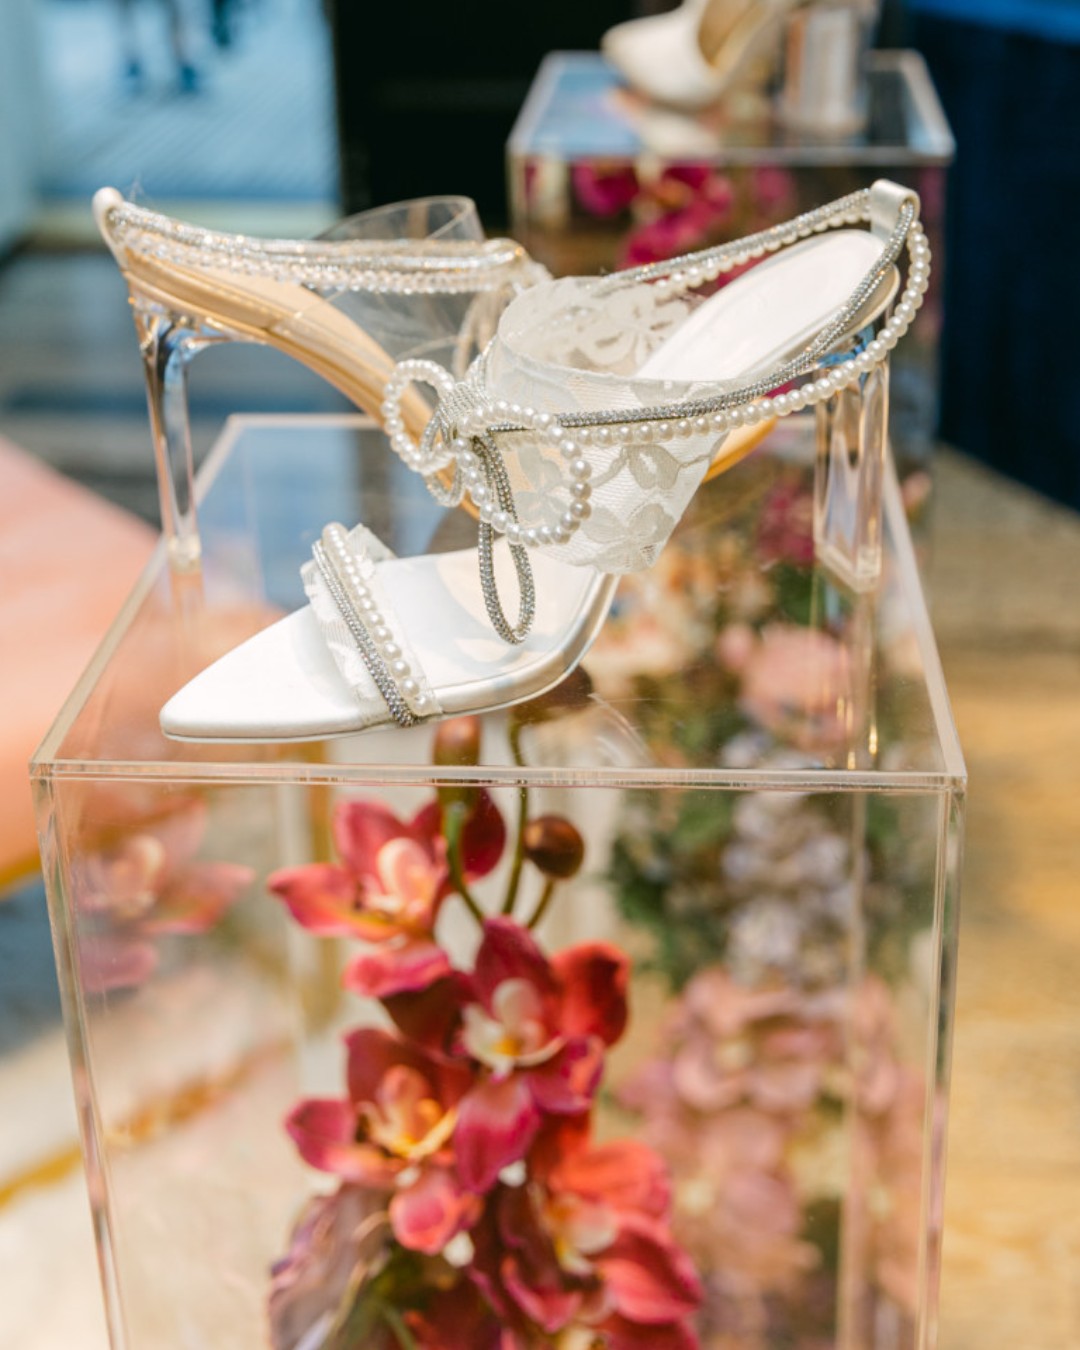 The Seaport on X: Time to sparkle and shine with new styles from She is  Cheval. Join Cheval for your very last chance to shop her shoes at her  special Farewell Flash